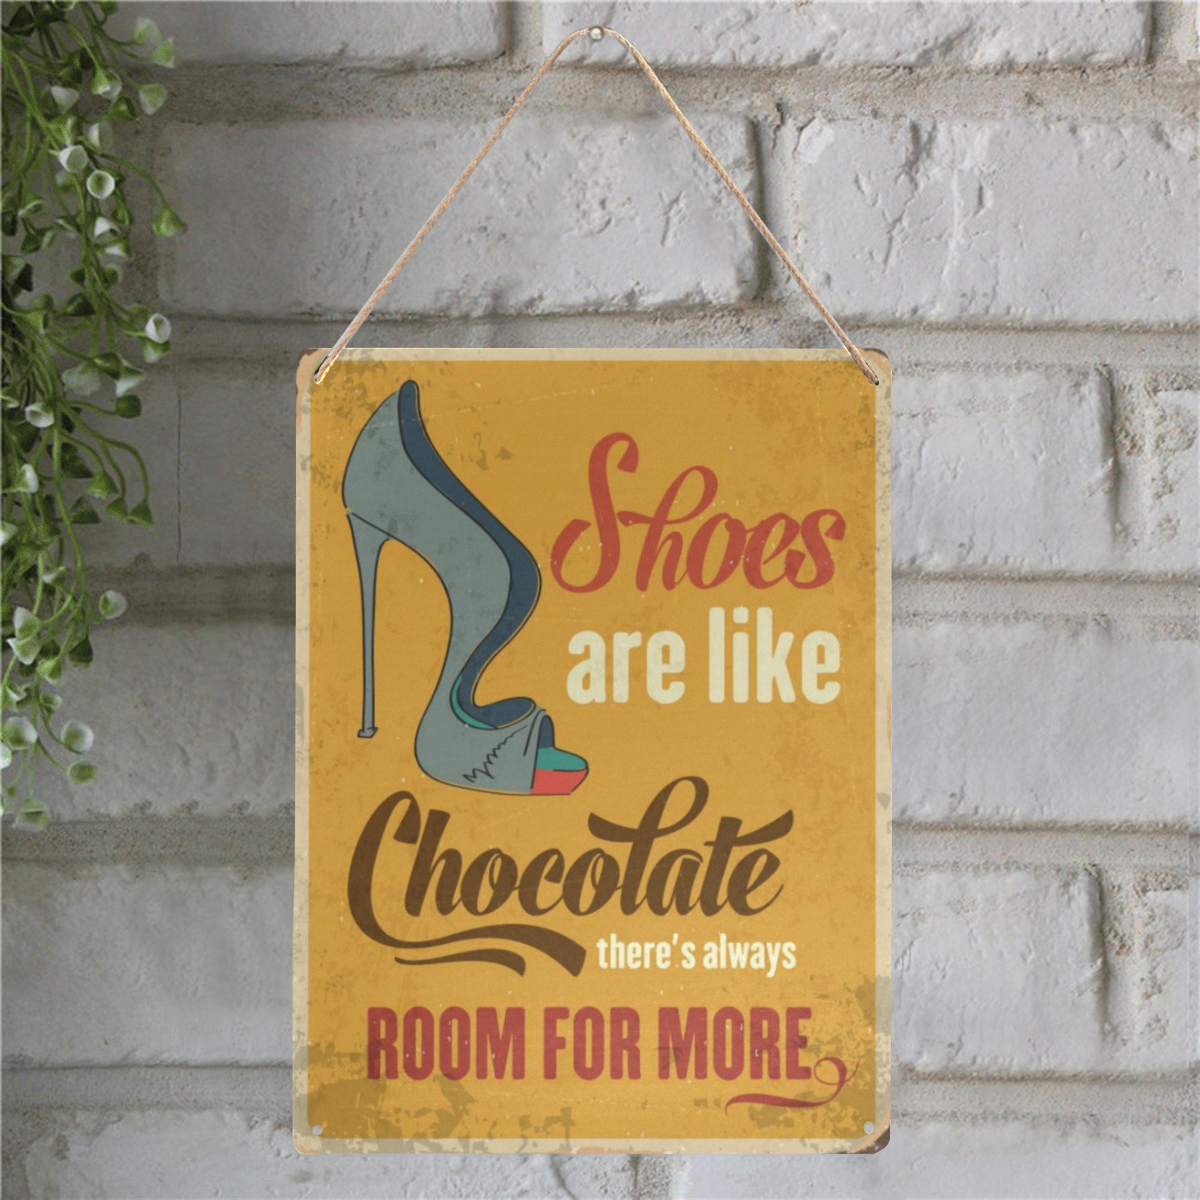 Shoes Are Like Chocolate Metal Tin Sign 12"x16"